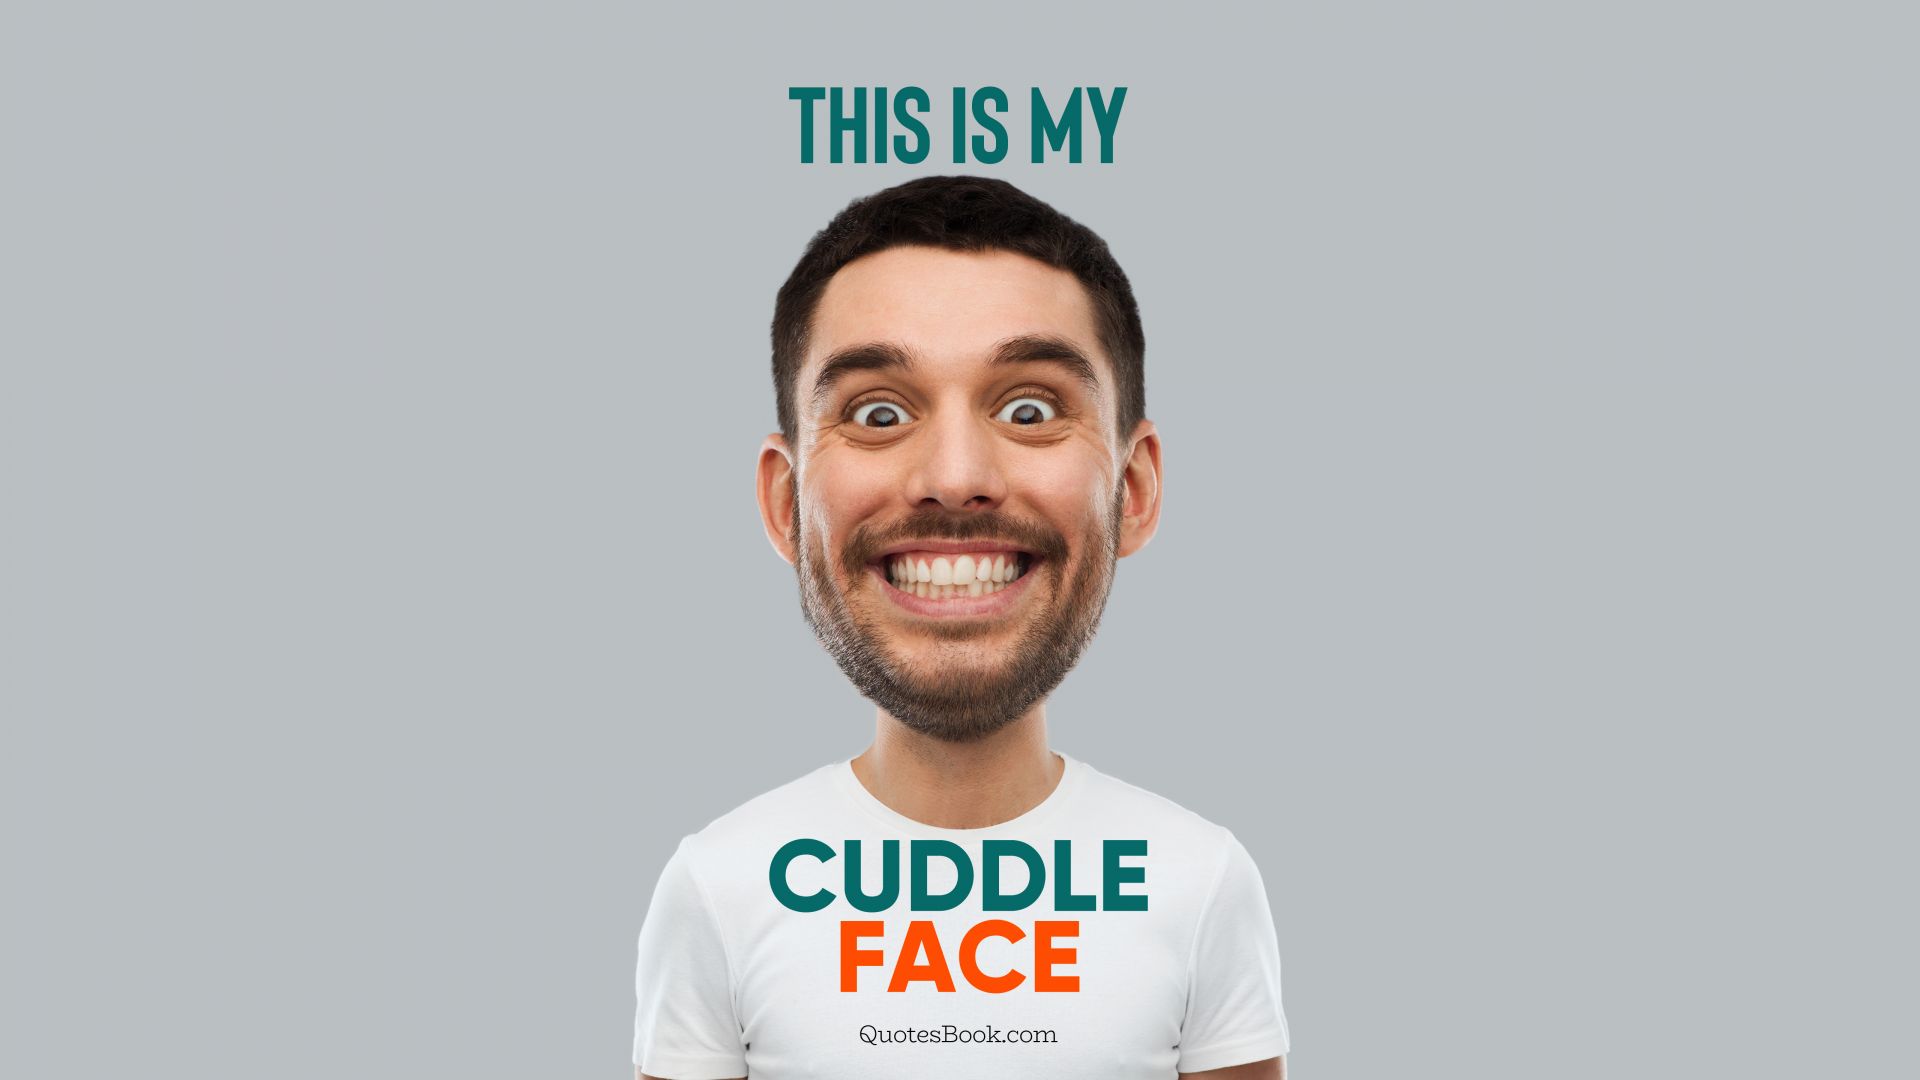 This is my cuddle face